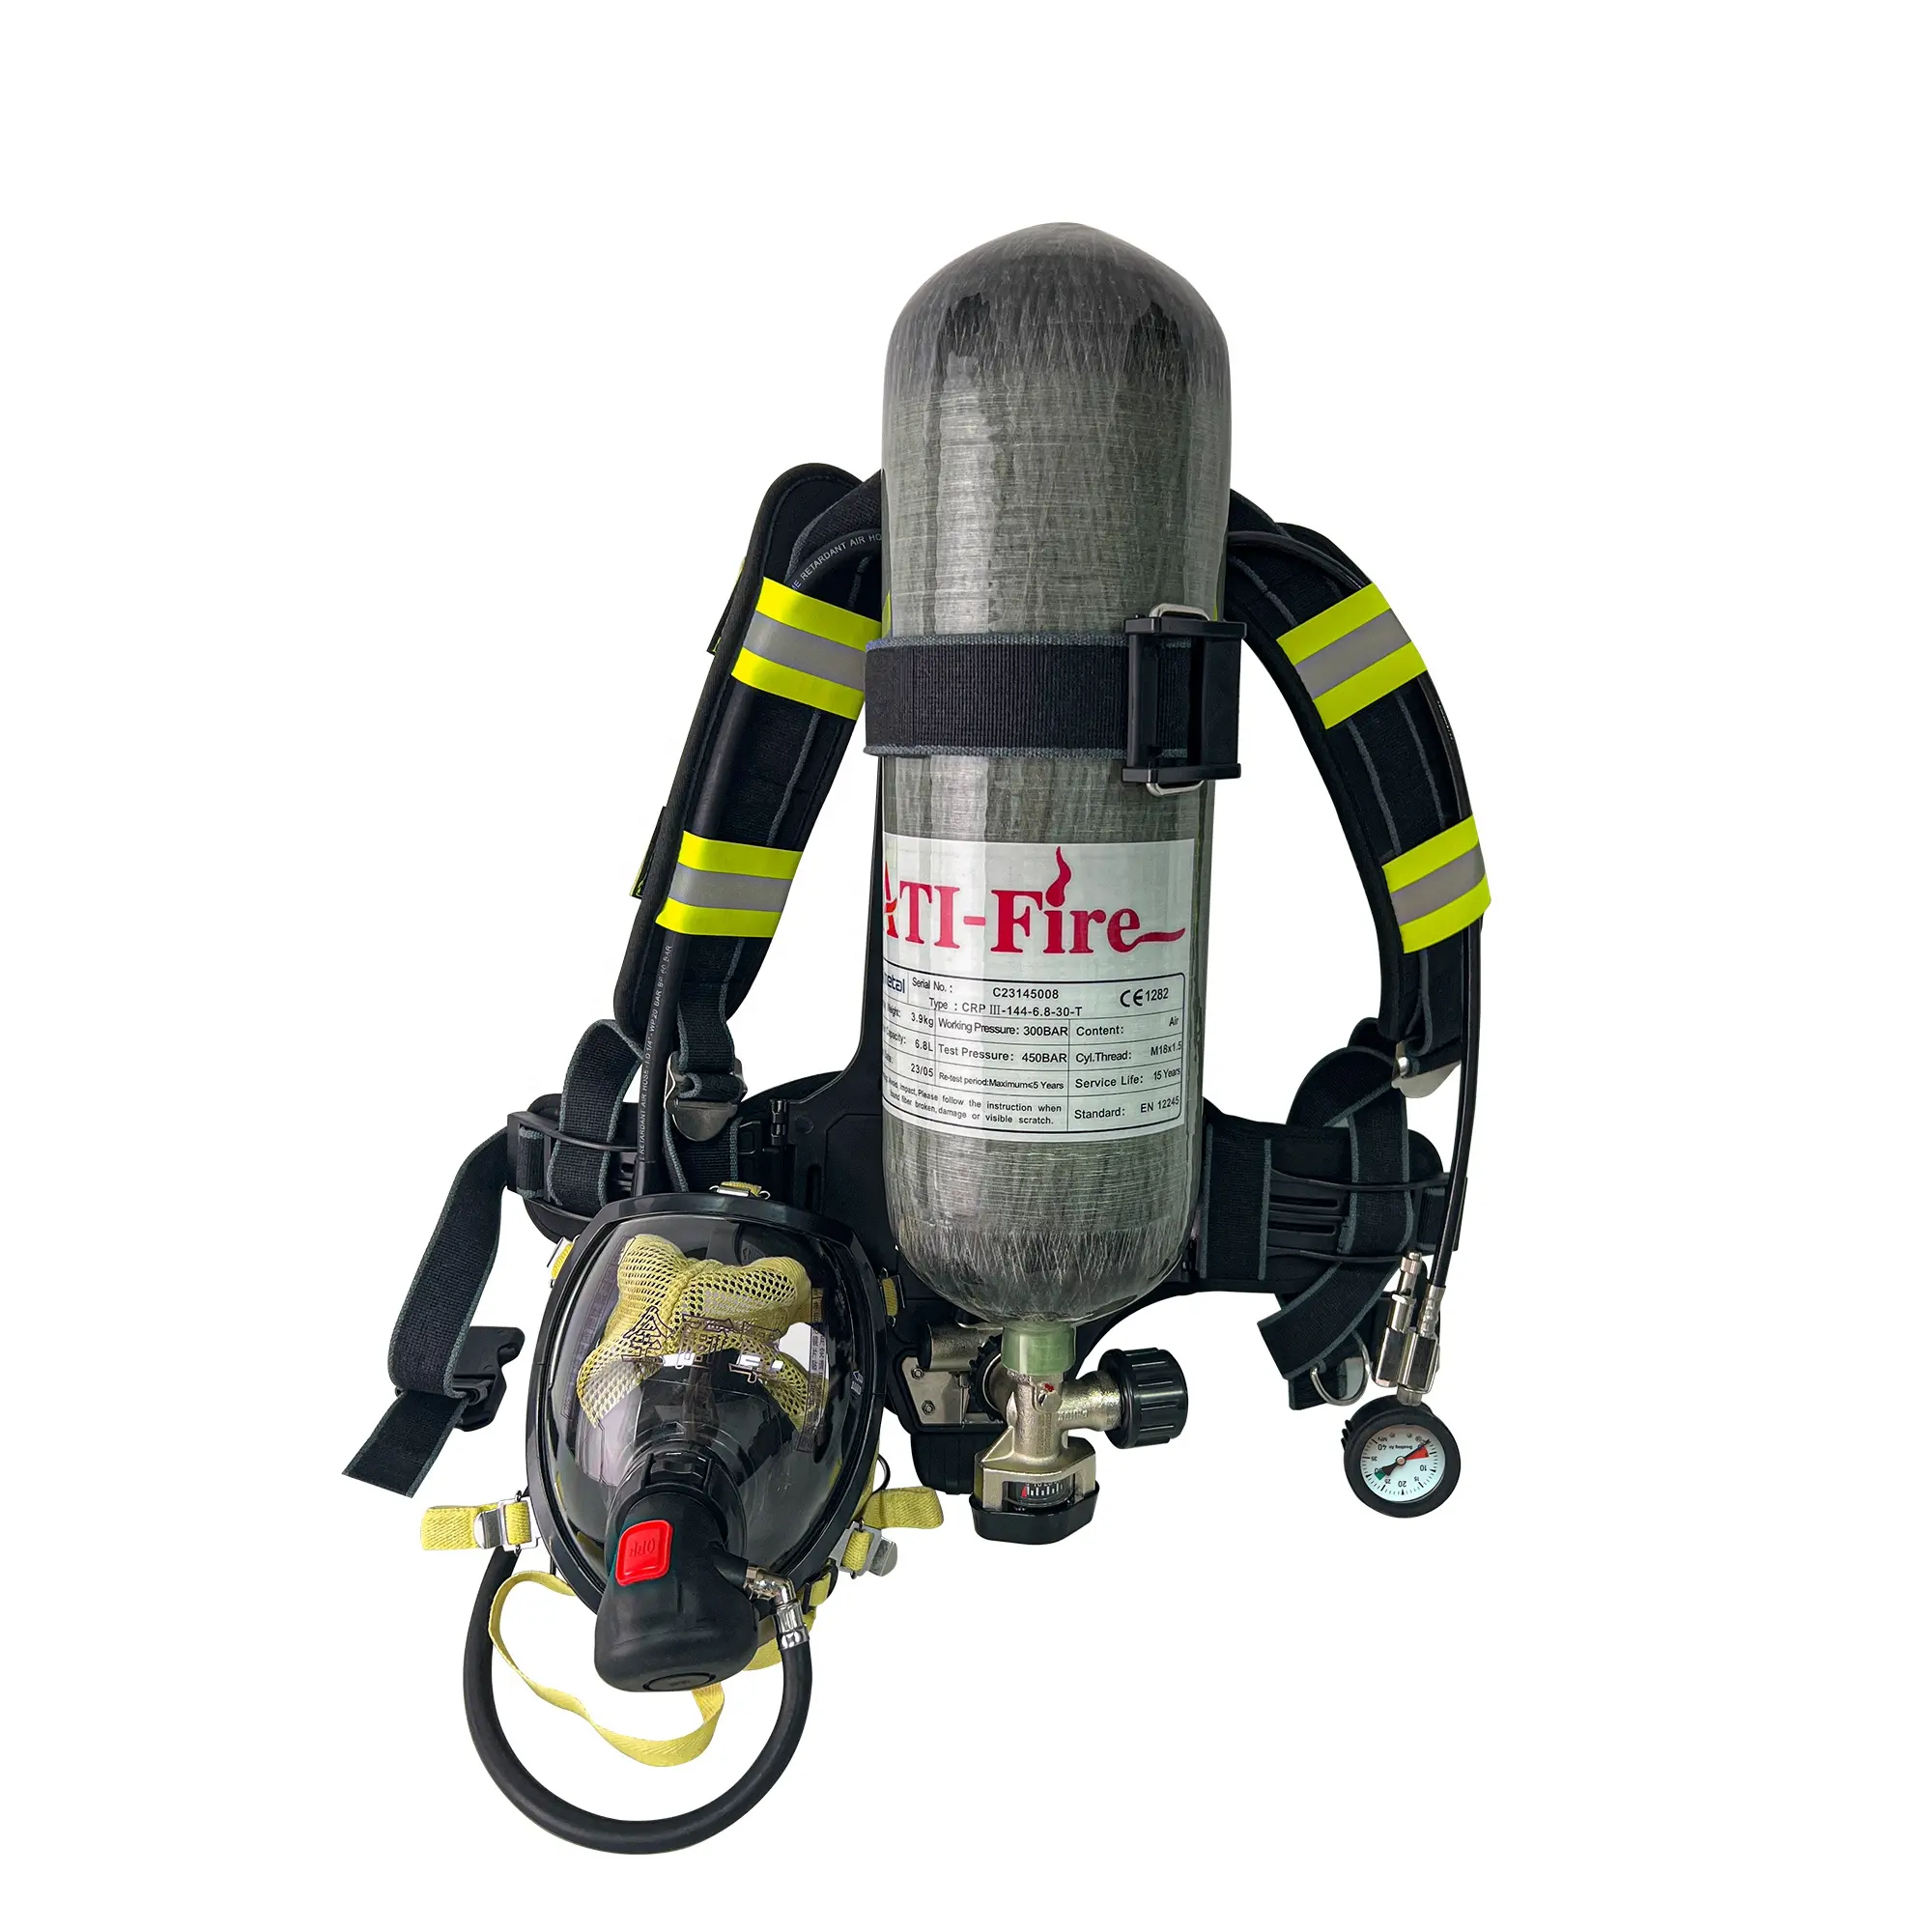 Safety firefighting equipment self contained breathing apparatus full face mask